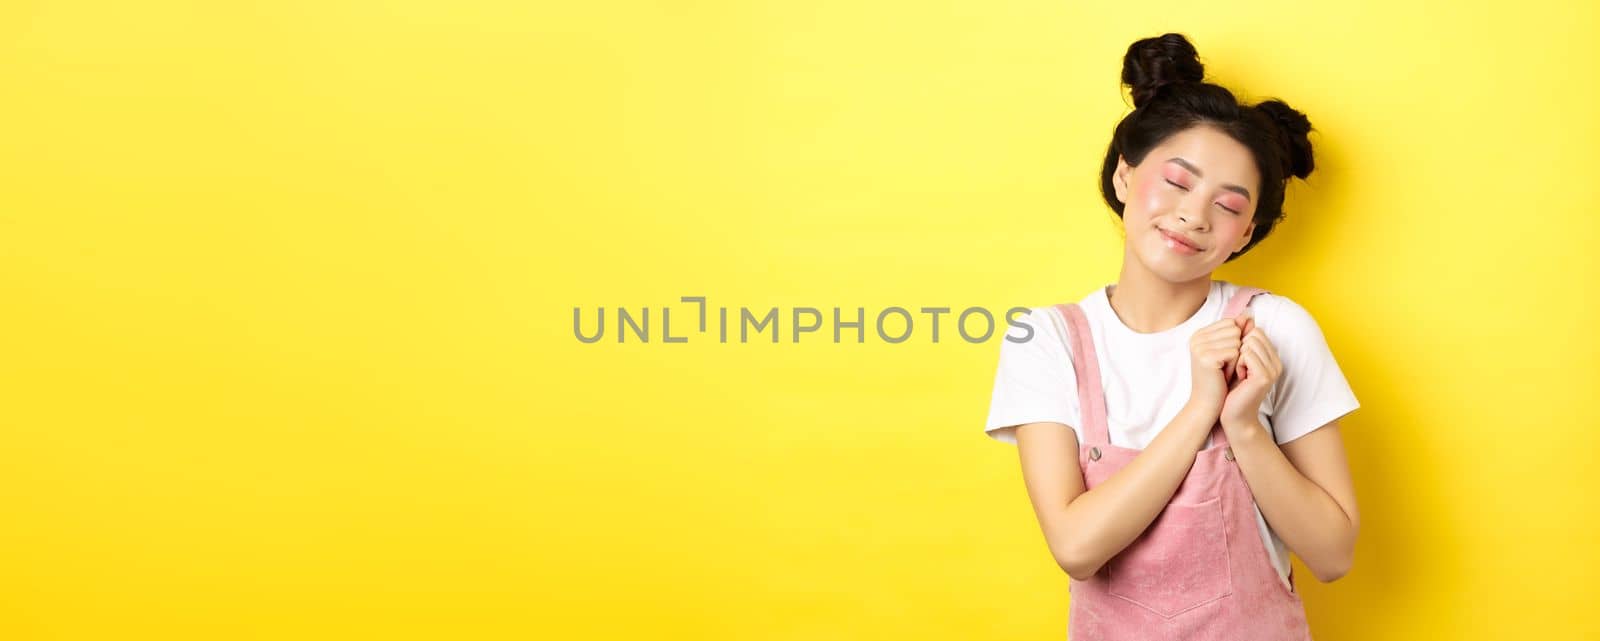 Cute asian girl with makeup, close eyes and remember beautiful moment, holding hands on heart daydreaming, standing on yellow background.